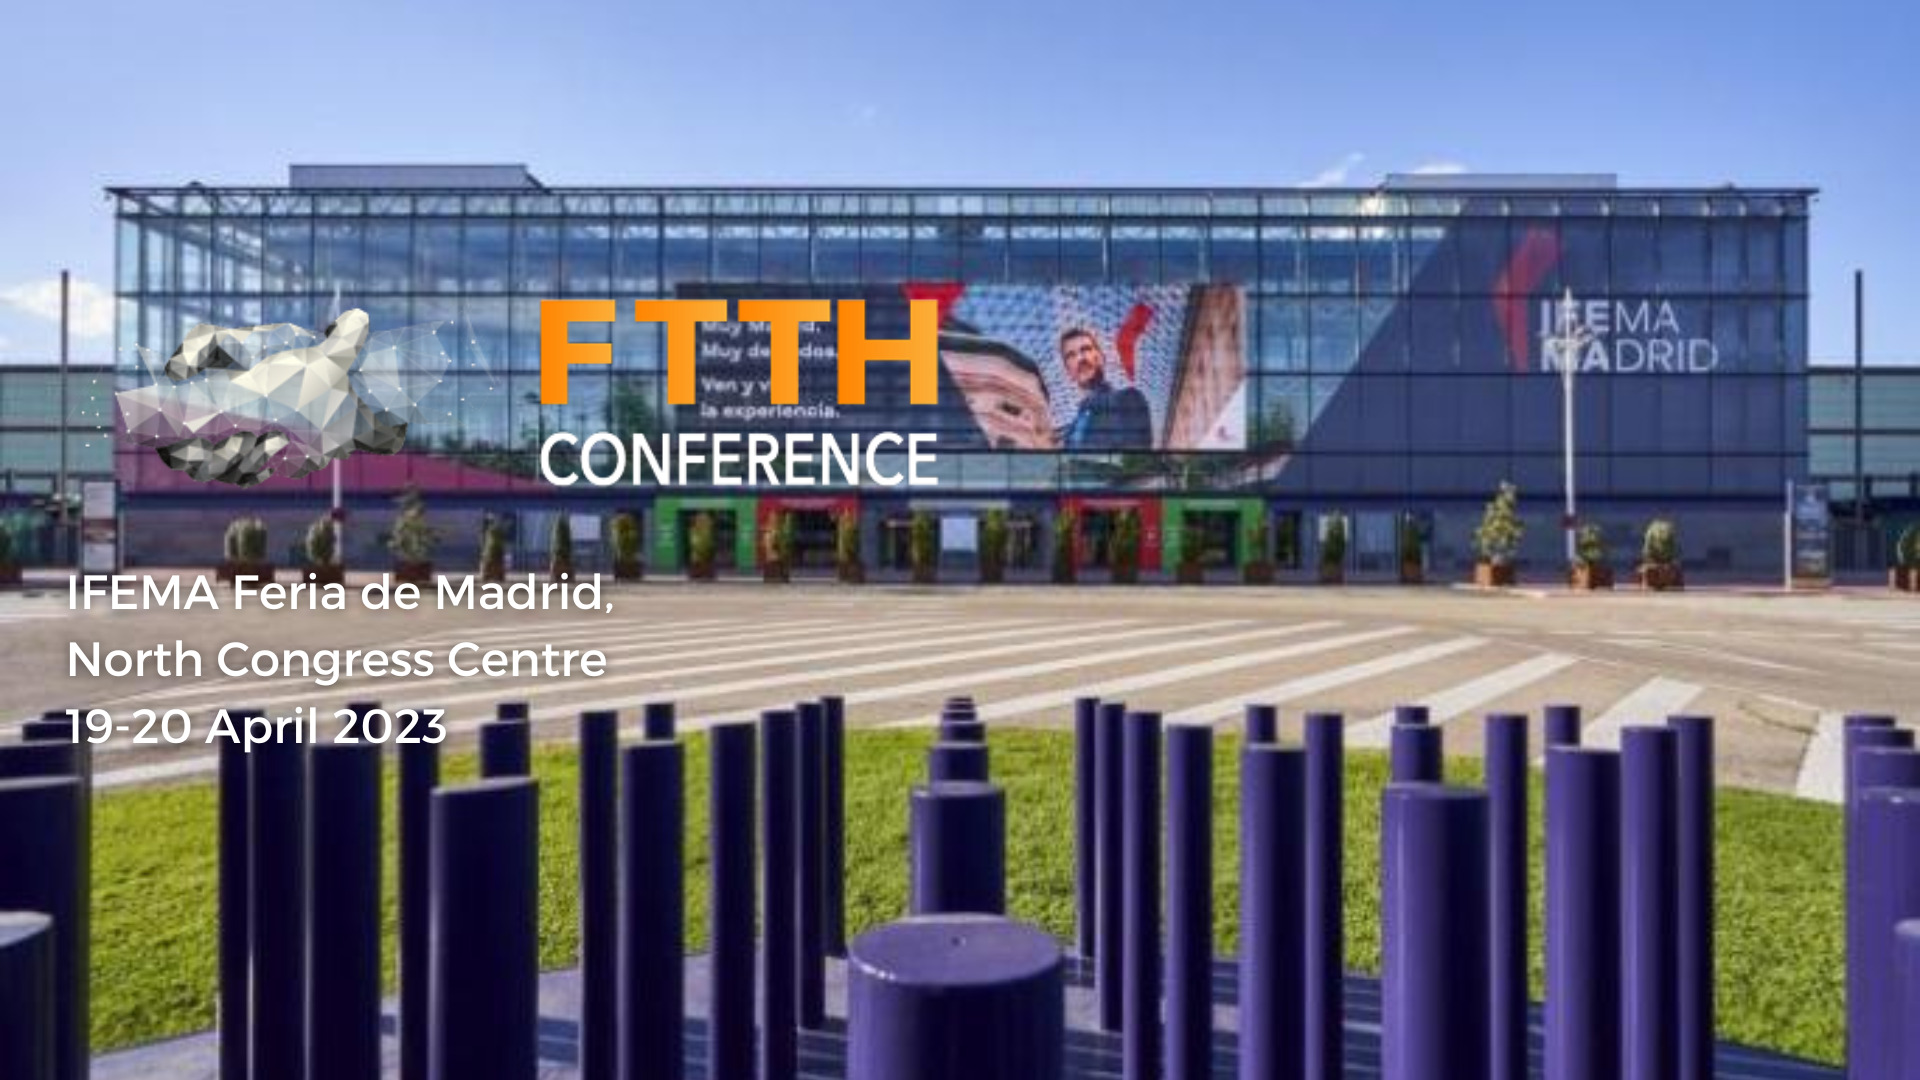 Attend FTTH Conference 2023